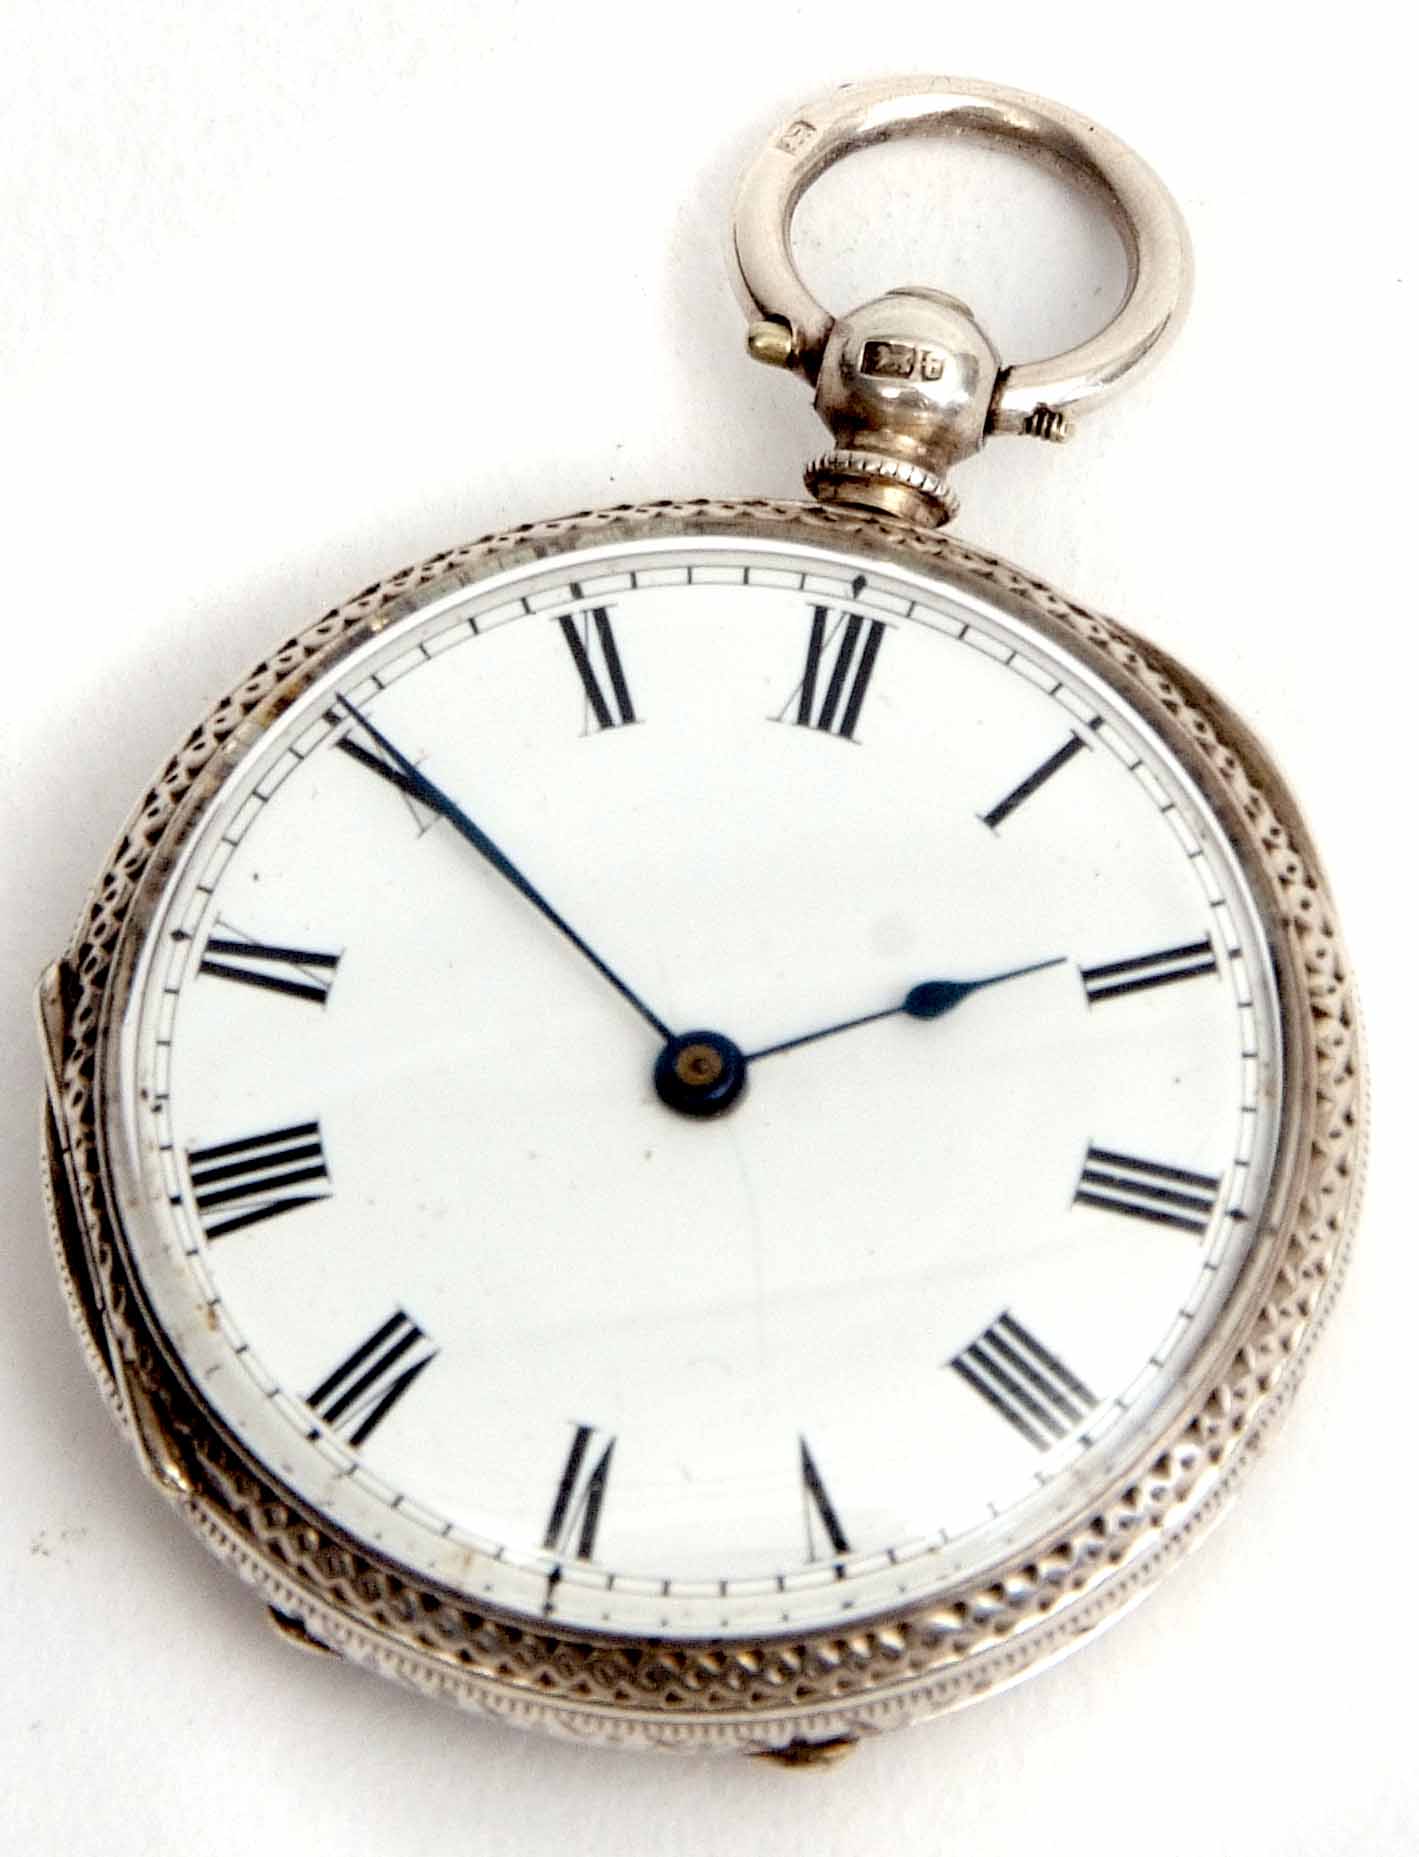 Late 19th century silver cased open face fob watch, the Swiss frosted and jewelled movement with